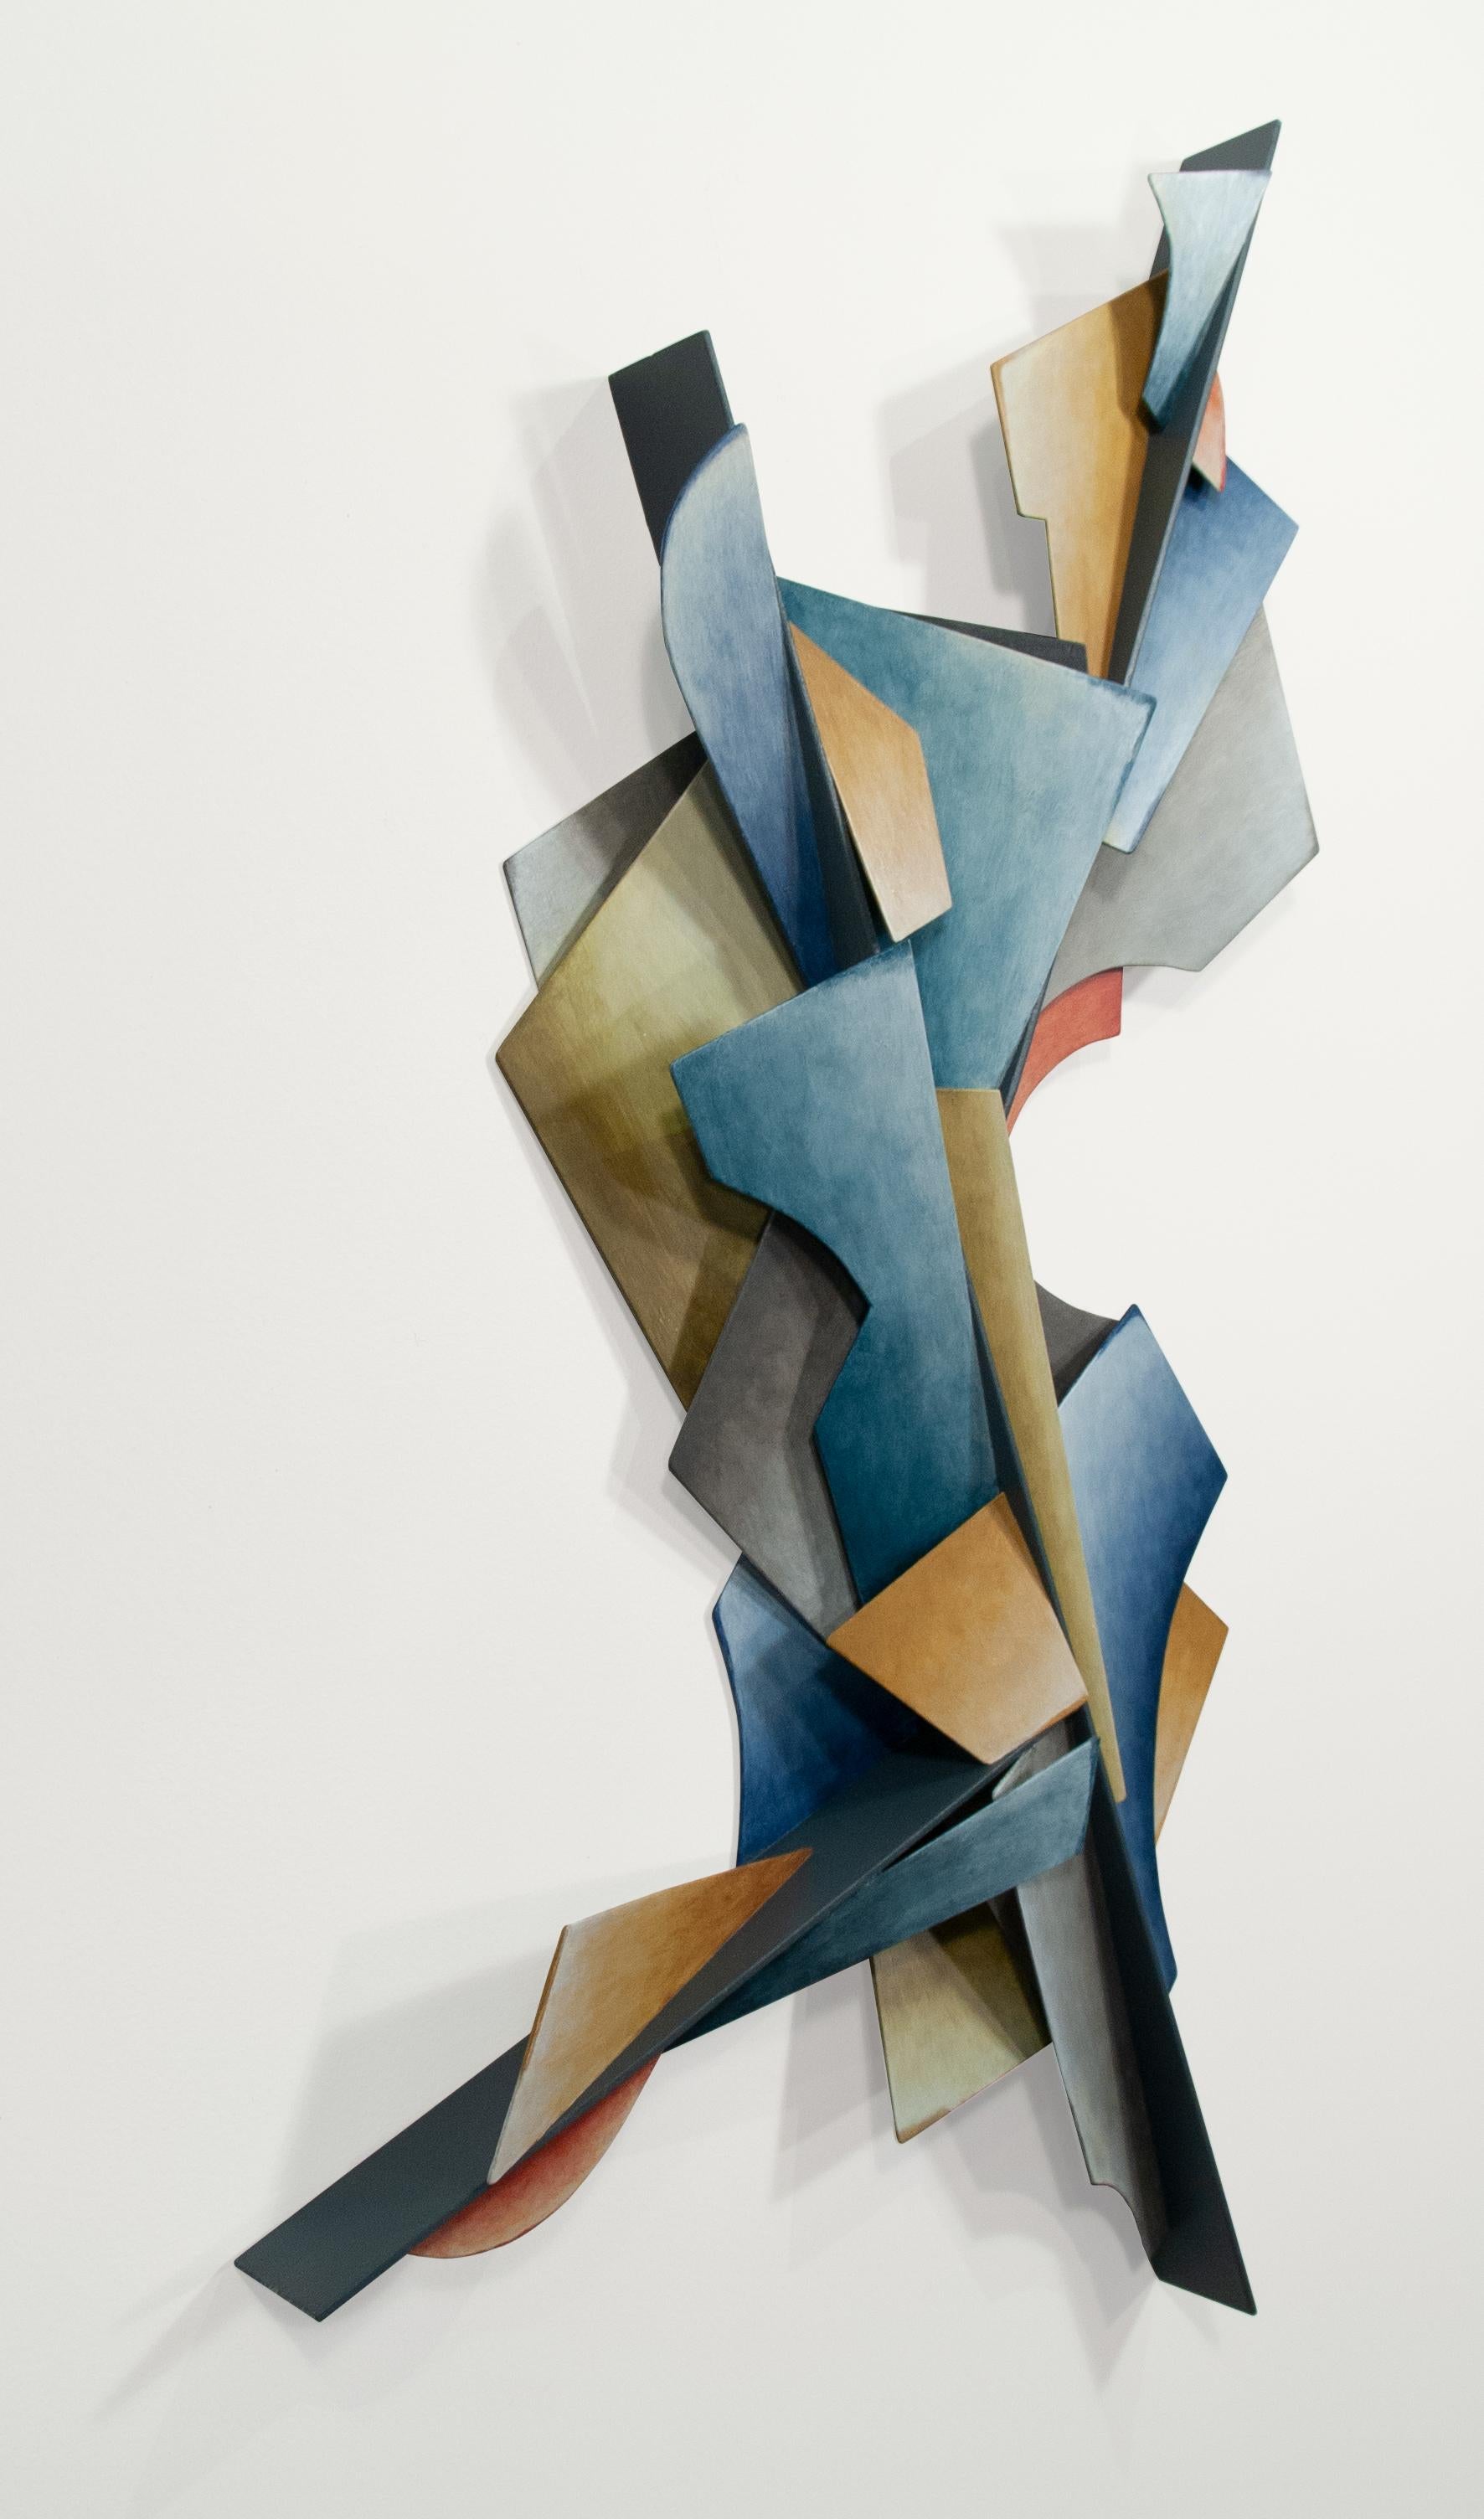 This dynamic wall sculpture is created from sheets of steel, welded together in an abstract geometric pattern.  Muted shades of blue, grey, purple and green dominate and are balanced by softer hues. While the work adheres to a rigid, rational